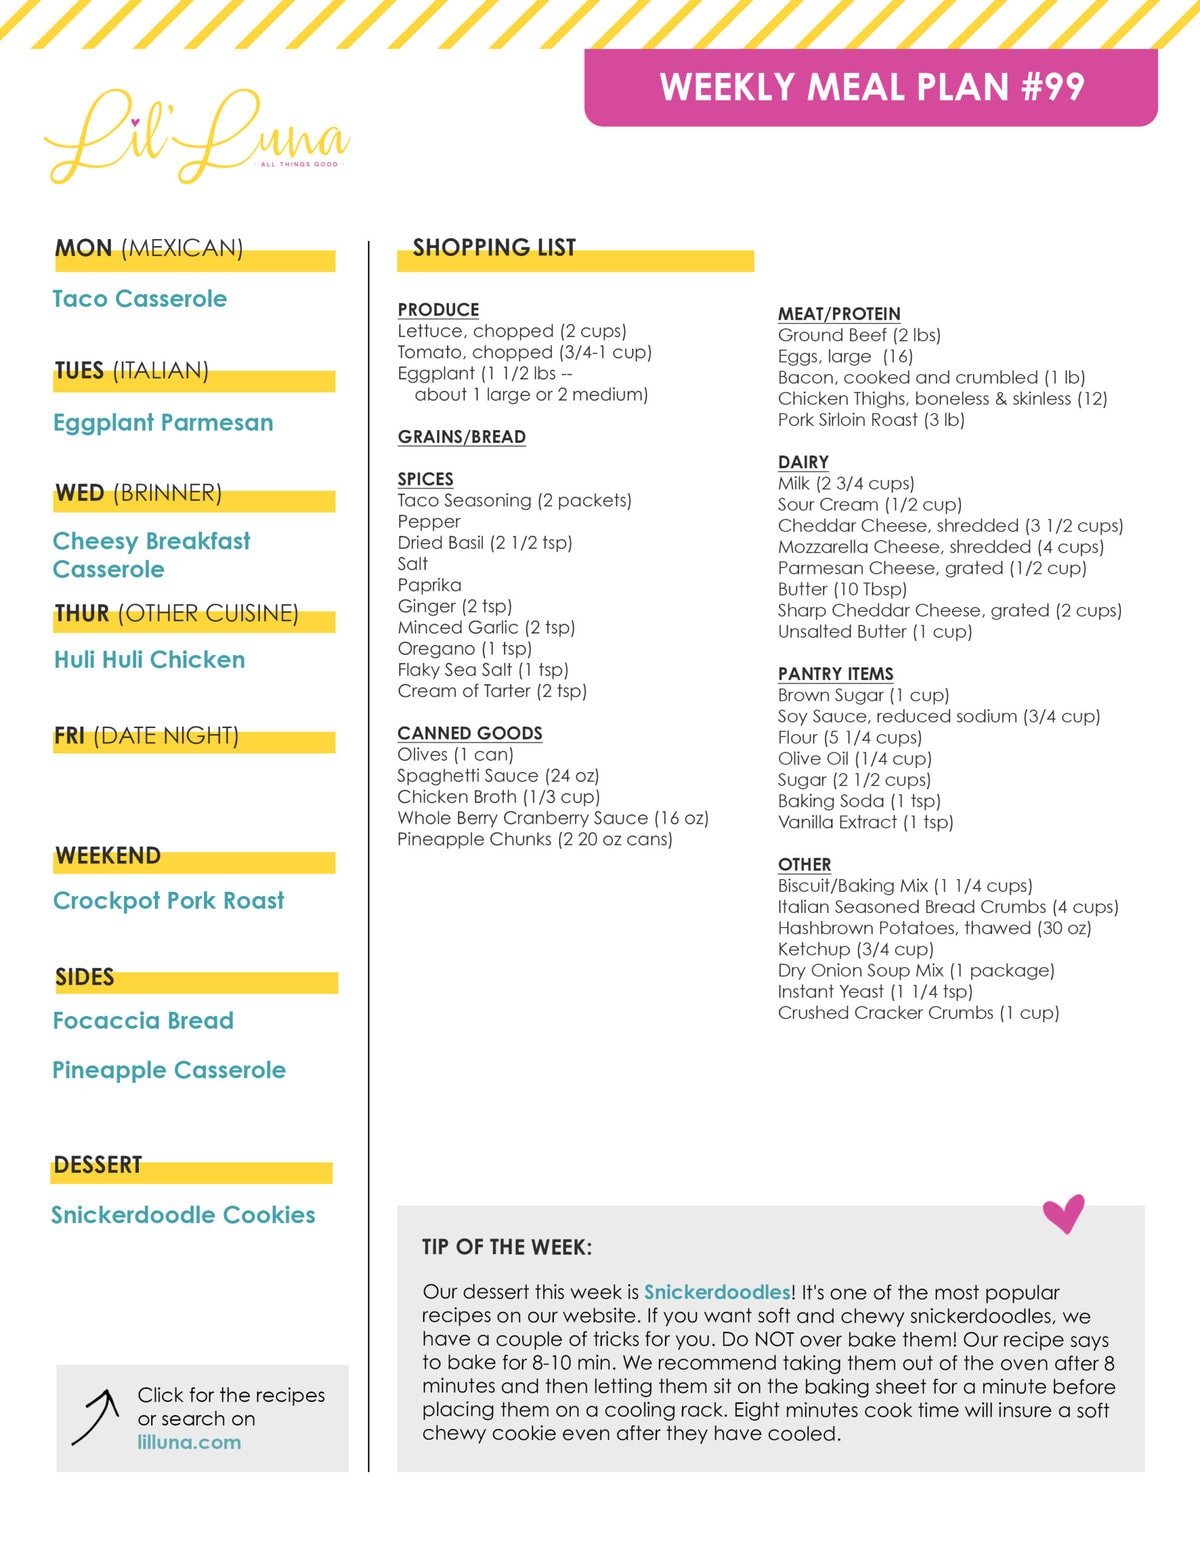 Printable version of Meal Plan #99 with grocery list.